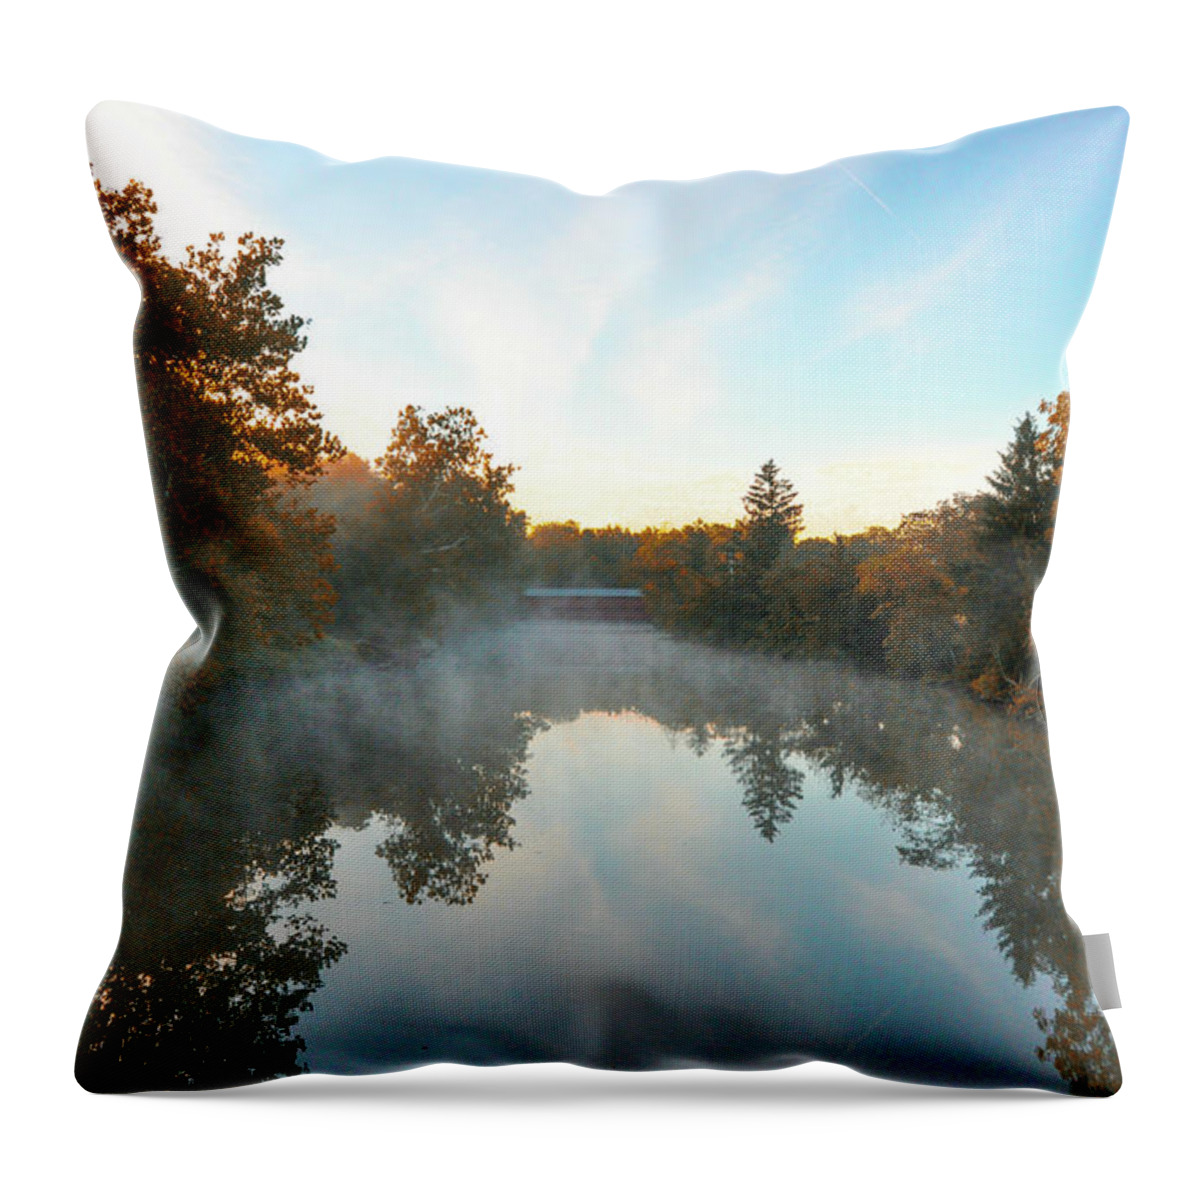 The Throw Pillow featuring the photograph The Long View - Sachs Covered Bridge - Gettysburg by Bill Cannon